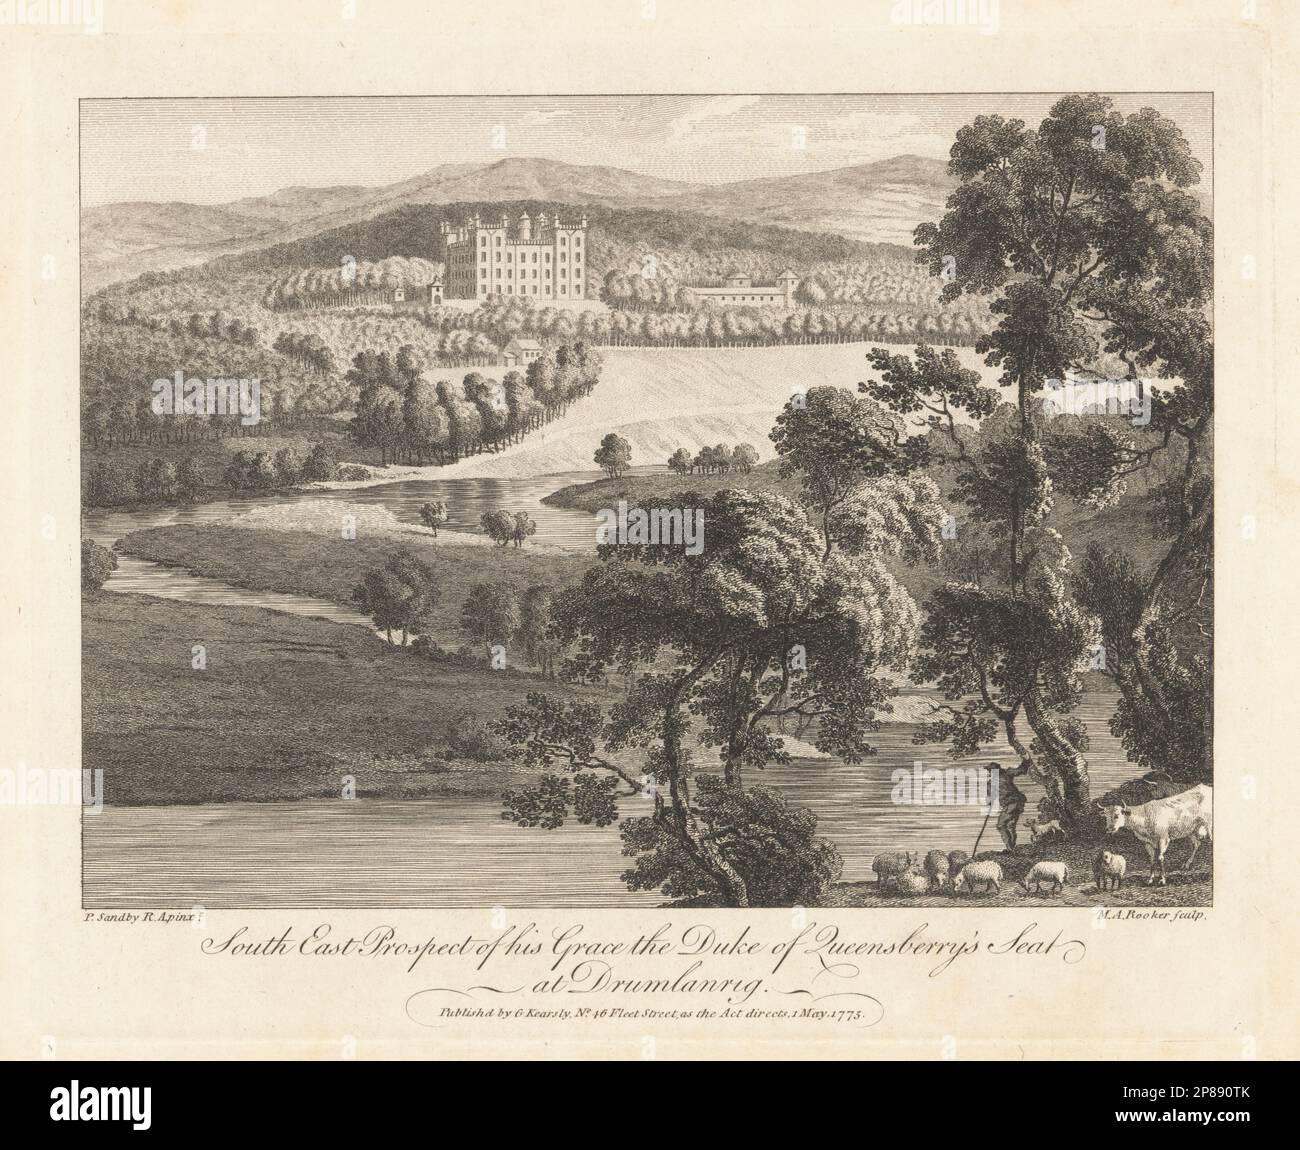 South-east prospect of the Duke of Queensberry's seat at Drumlanrig, Scotland. The Pink Palace or Drumlanrig Castle, 17th century Renaissance house built in pink sandstone. Home of Scottish landowner William Douglas, 4th Duke of Queensberry. Copperplate engraving by Michael Angelo Rooker after an illustration by Paul Sandby from The Copper Plate Magazine or Monthly Treasure, G. Kearsley, London, May 1, 1775. Stock Photo